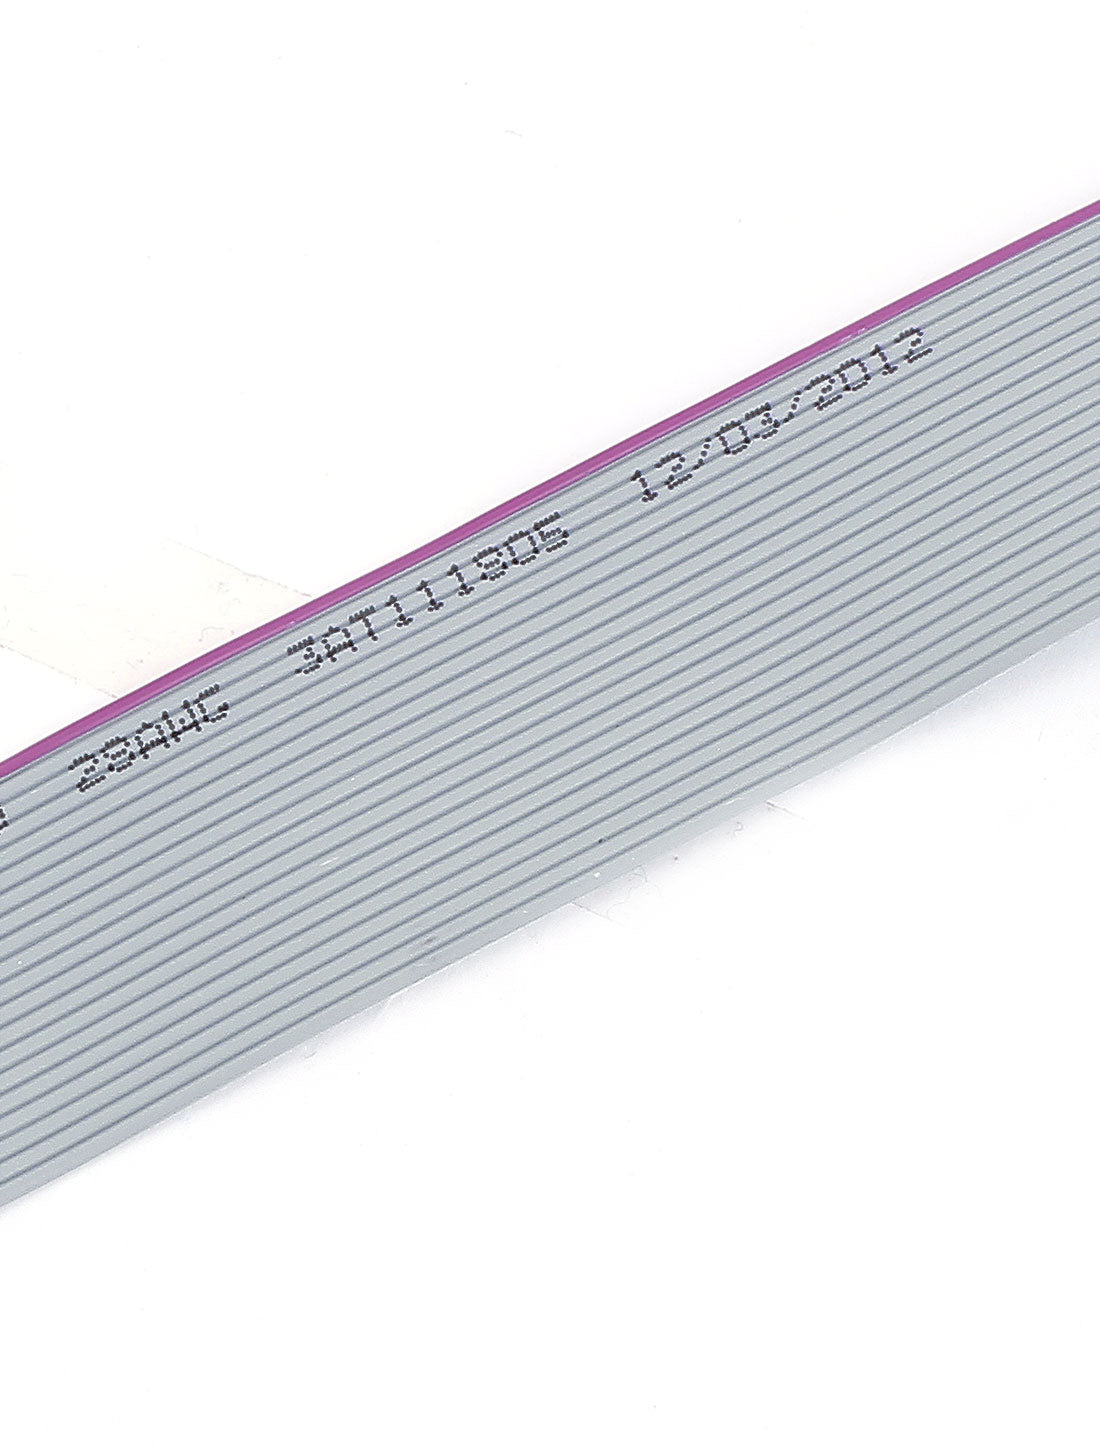 uxcell Uxcell 2.54mm Pitch IDC 20-Pin F/F Connector Extension Flat Ribbon Cable 148cm Length